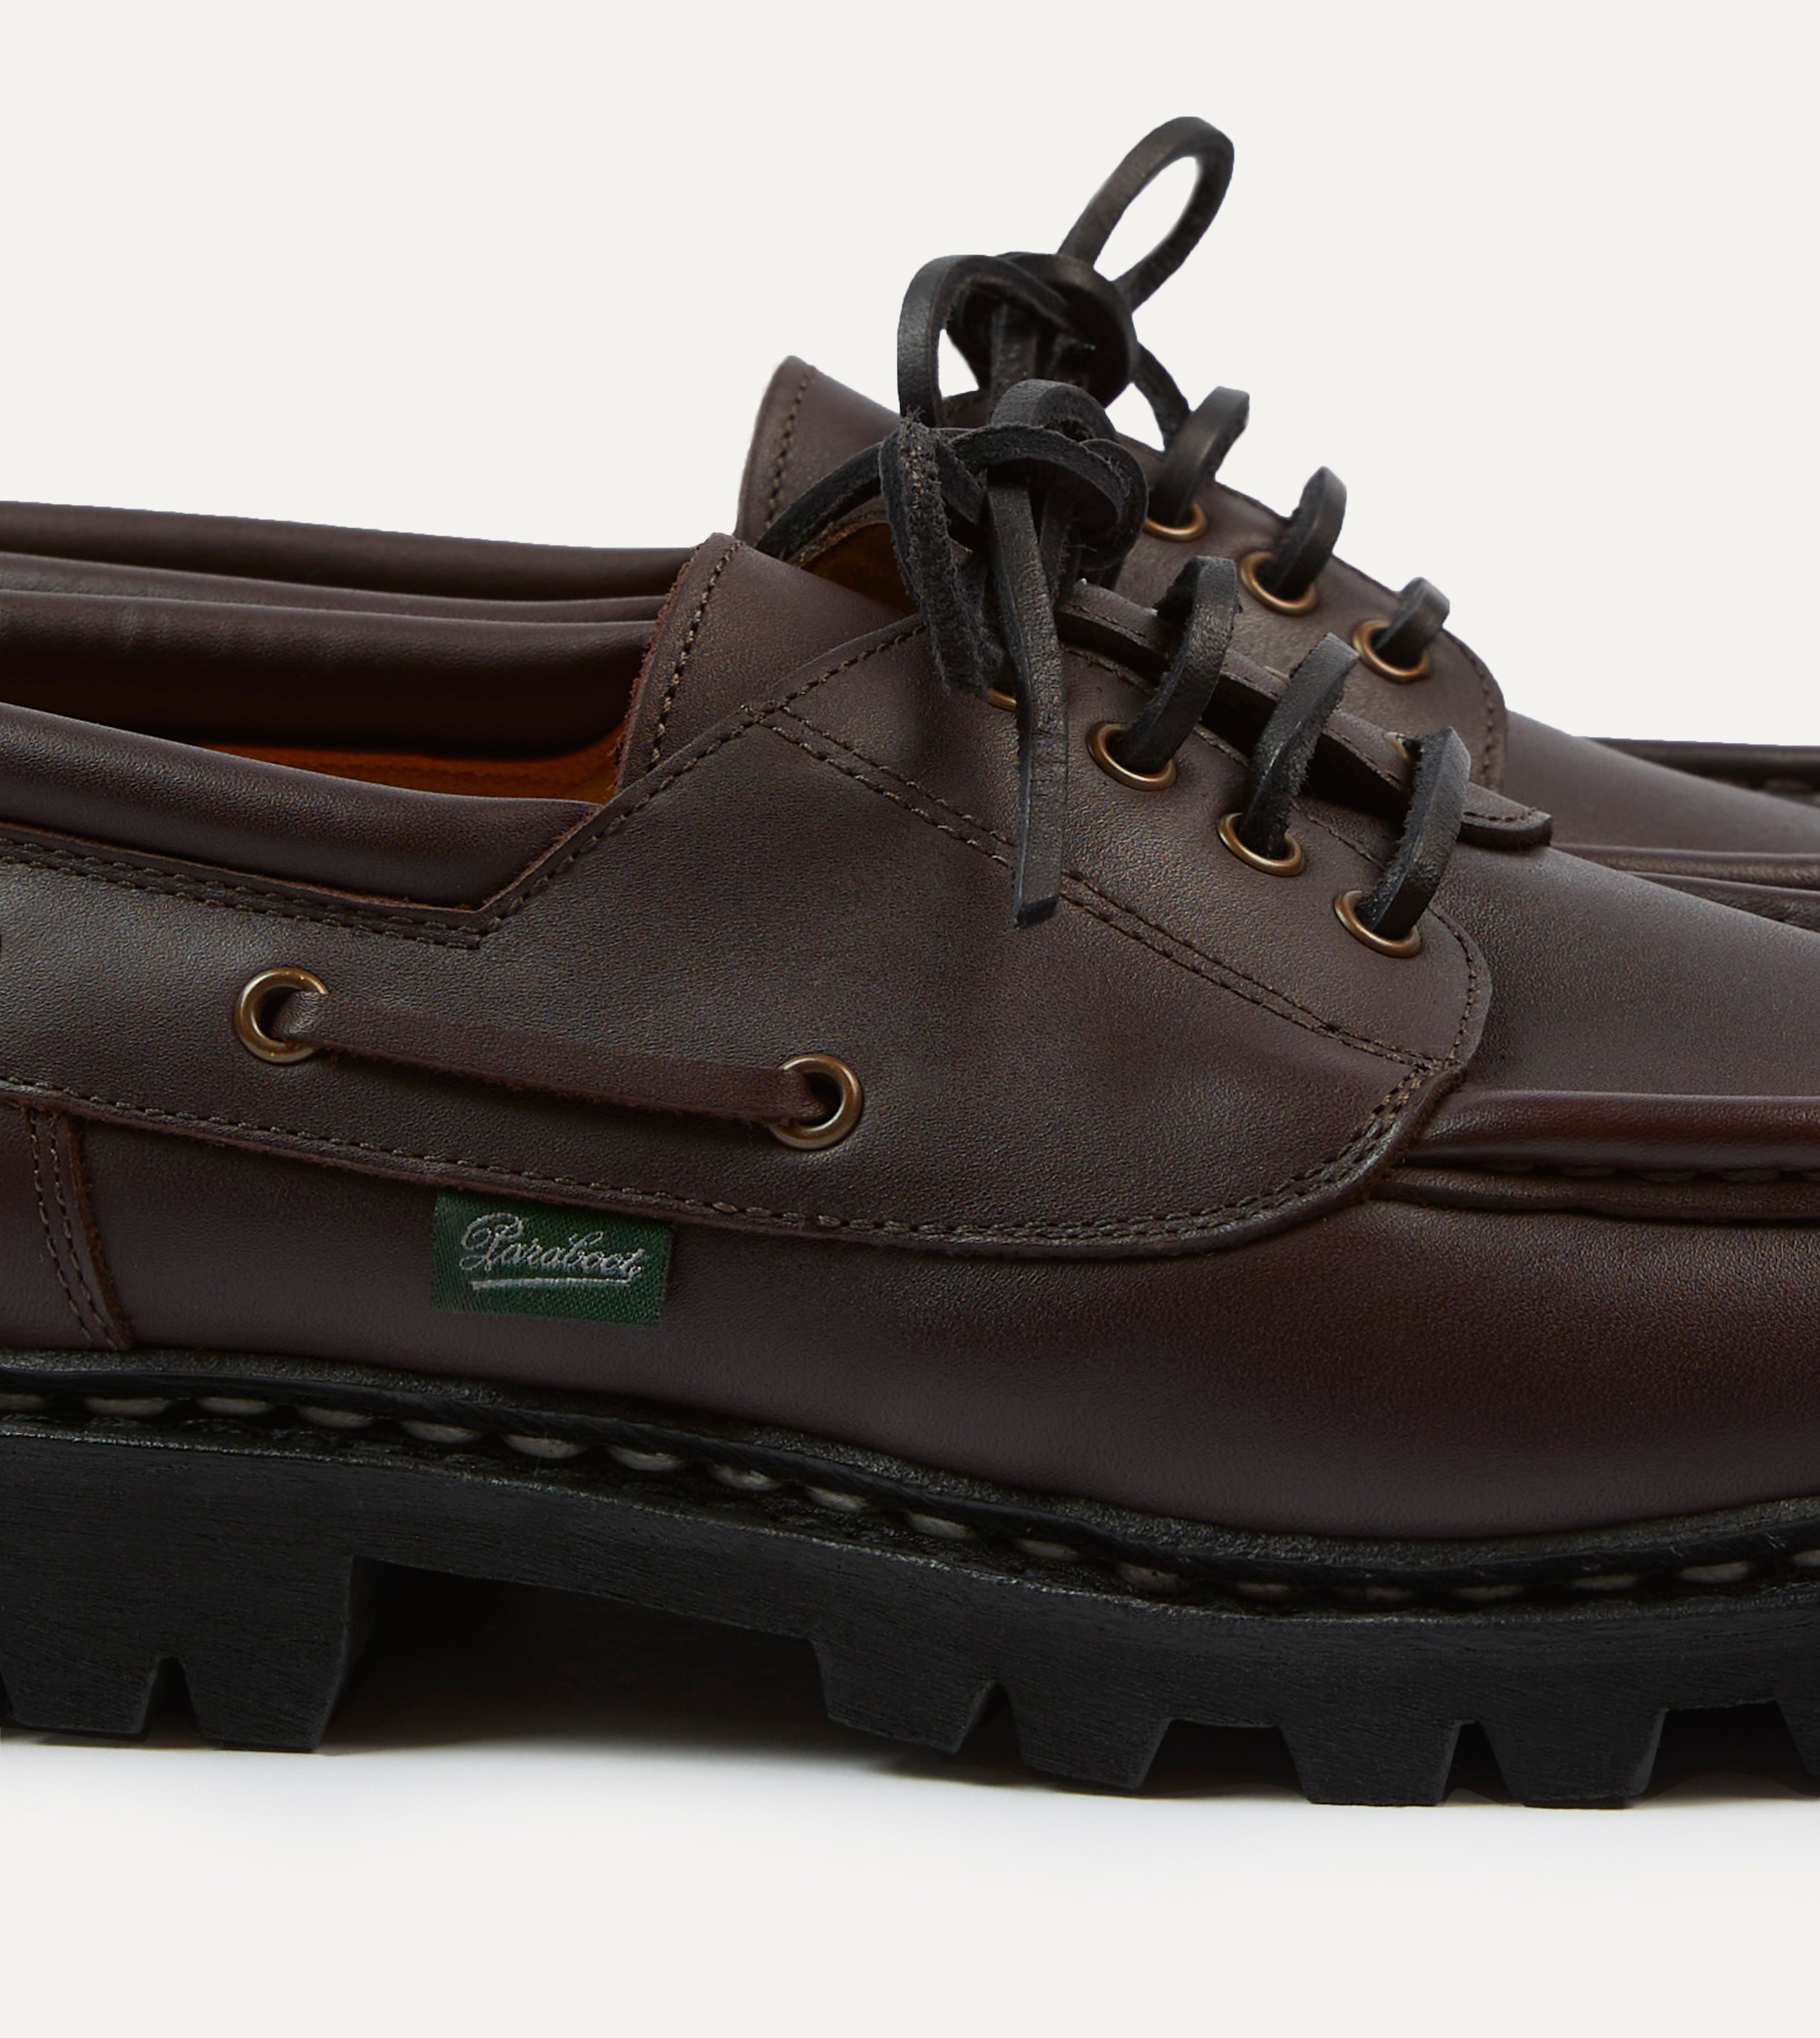 Paraboot Chimey Dark Brown Calf Leather Derby Shoe – Drakes US